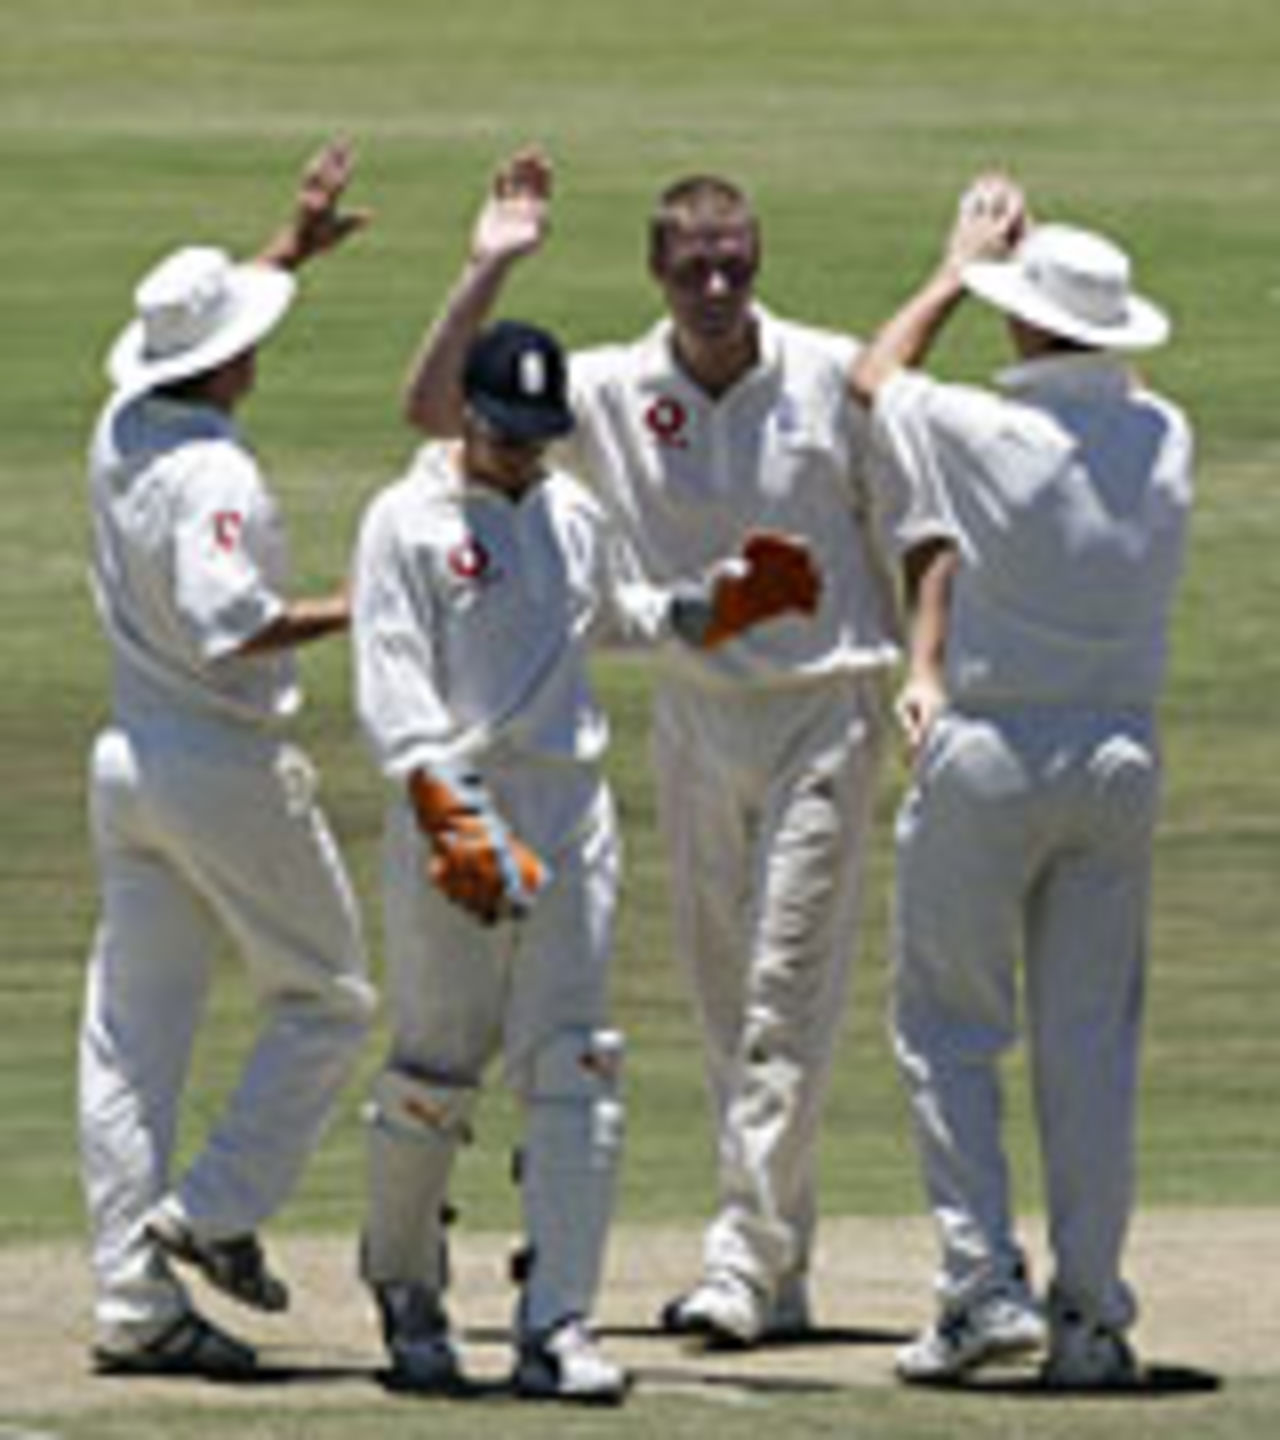 Andrew Flintoff celebrates a wicket with team-mates, South Africa A v England XI, Potchefstroom, December 12 2004